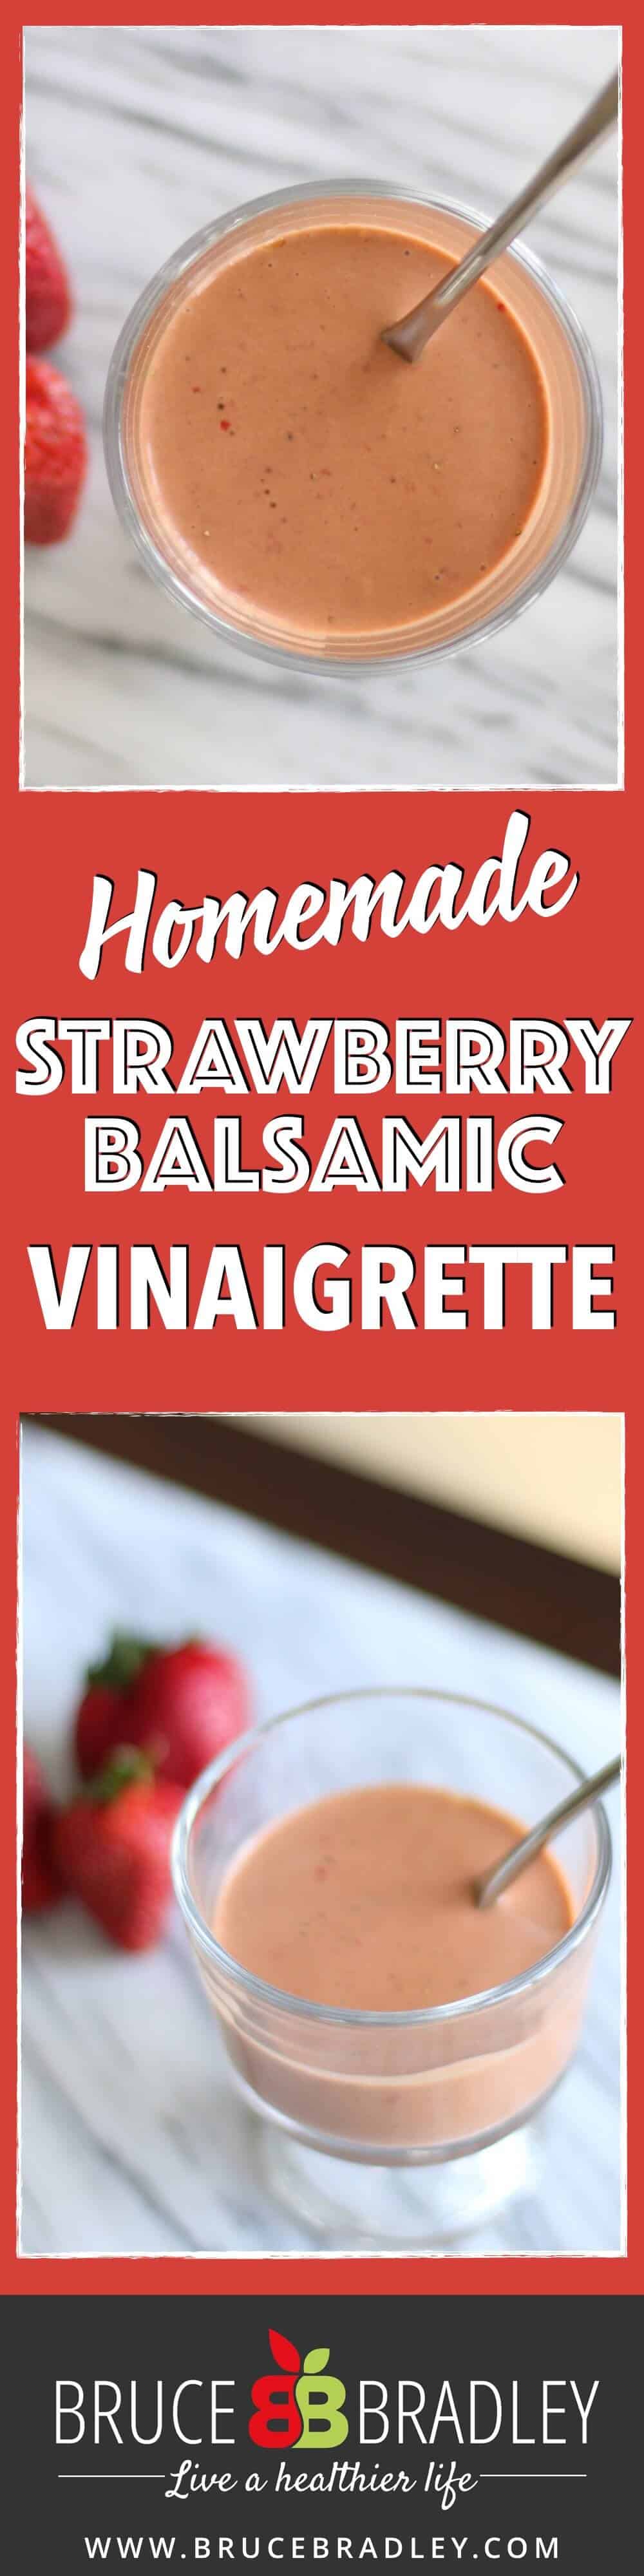 This Strawberry Balsamic Vinaigrette Salad Dressing Is Made With Fresh Or Frozen Strawberries And Turns Your Salad From Ordinary To Extraordinary In A Flash!